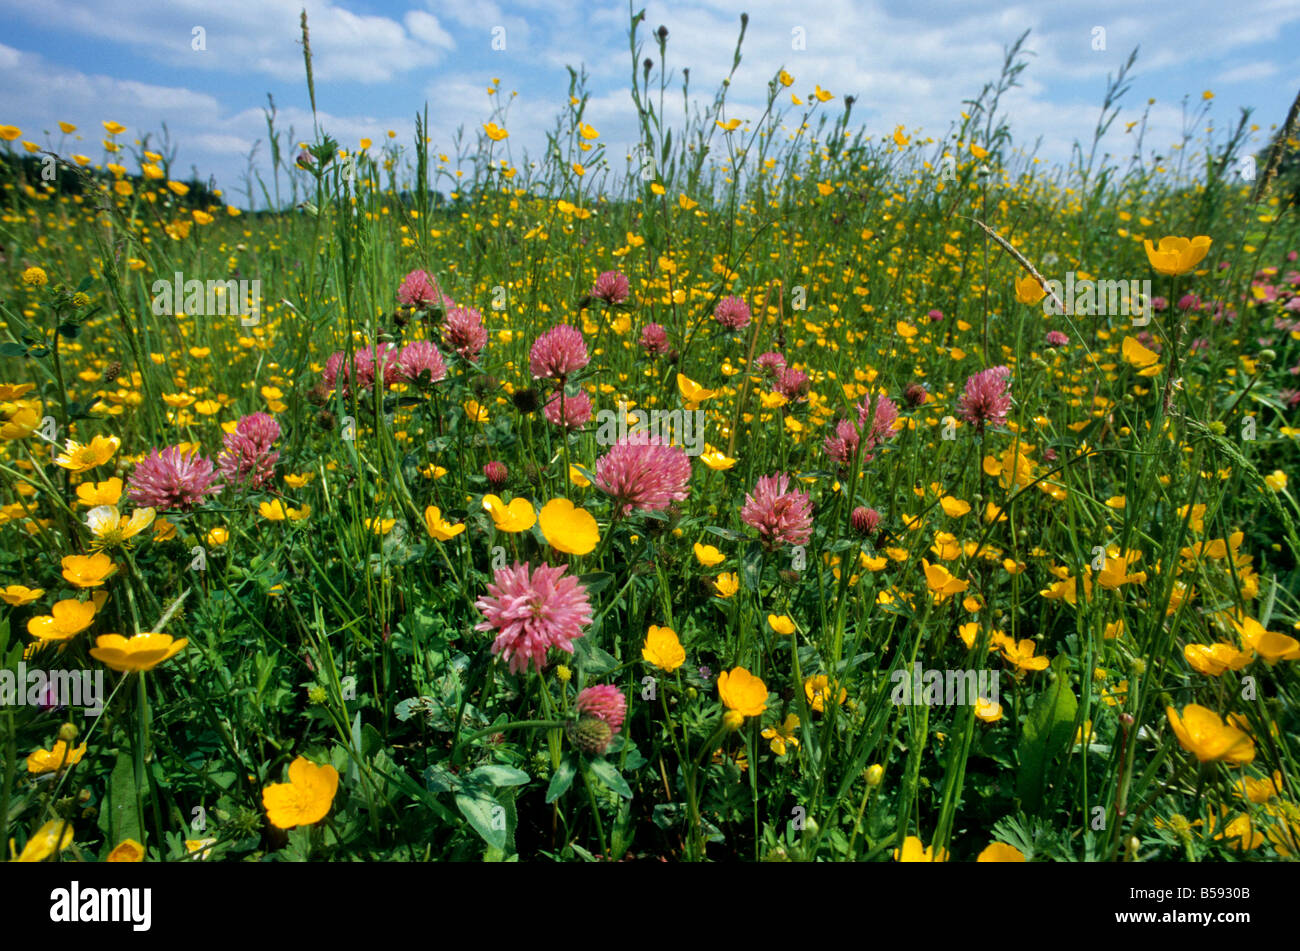 Red Clover / Meadow Buttercup Stock Photo